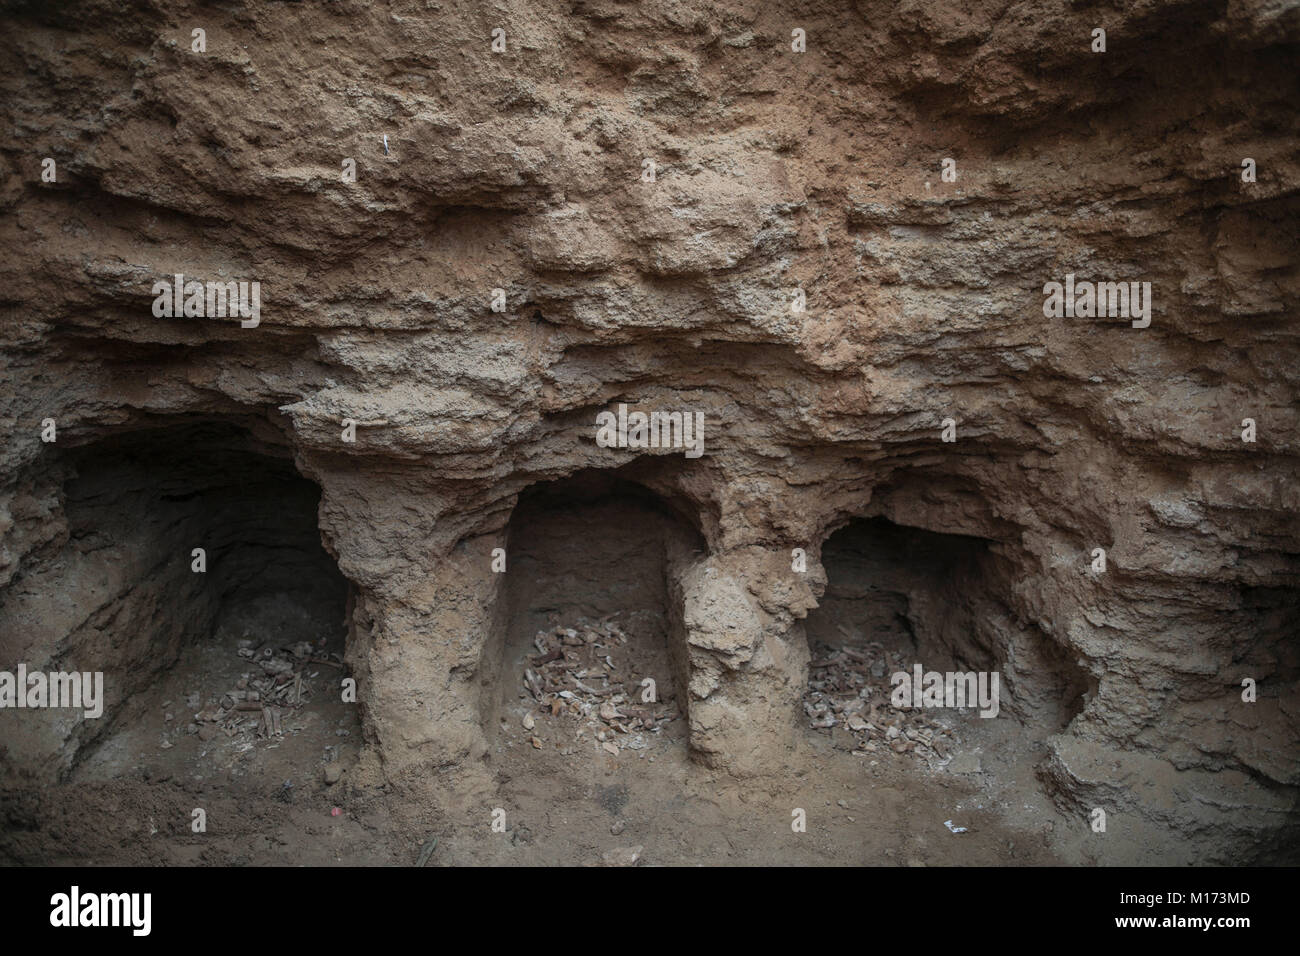 Beit Hanoun, Northern Gaza City. 27th Jan, 2018. Three of nine burial holes with bones pictured in a tomb discovered by Abdelkarim al-Kafarna, in his backyard in Beit Hanoun, Northern Gaza City, 27 January 2018. Archaeologists in Gaza say they believe it is about 2,000-year-old, dating back to the Roman era, where Gaza was part of the far-flung Roman Empire. Further tests are to be carried out to determine THE exact age. Credit: Wissam Nassar/dpa/Alamy Live News Stock Photo